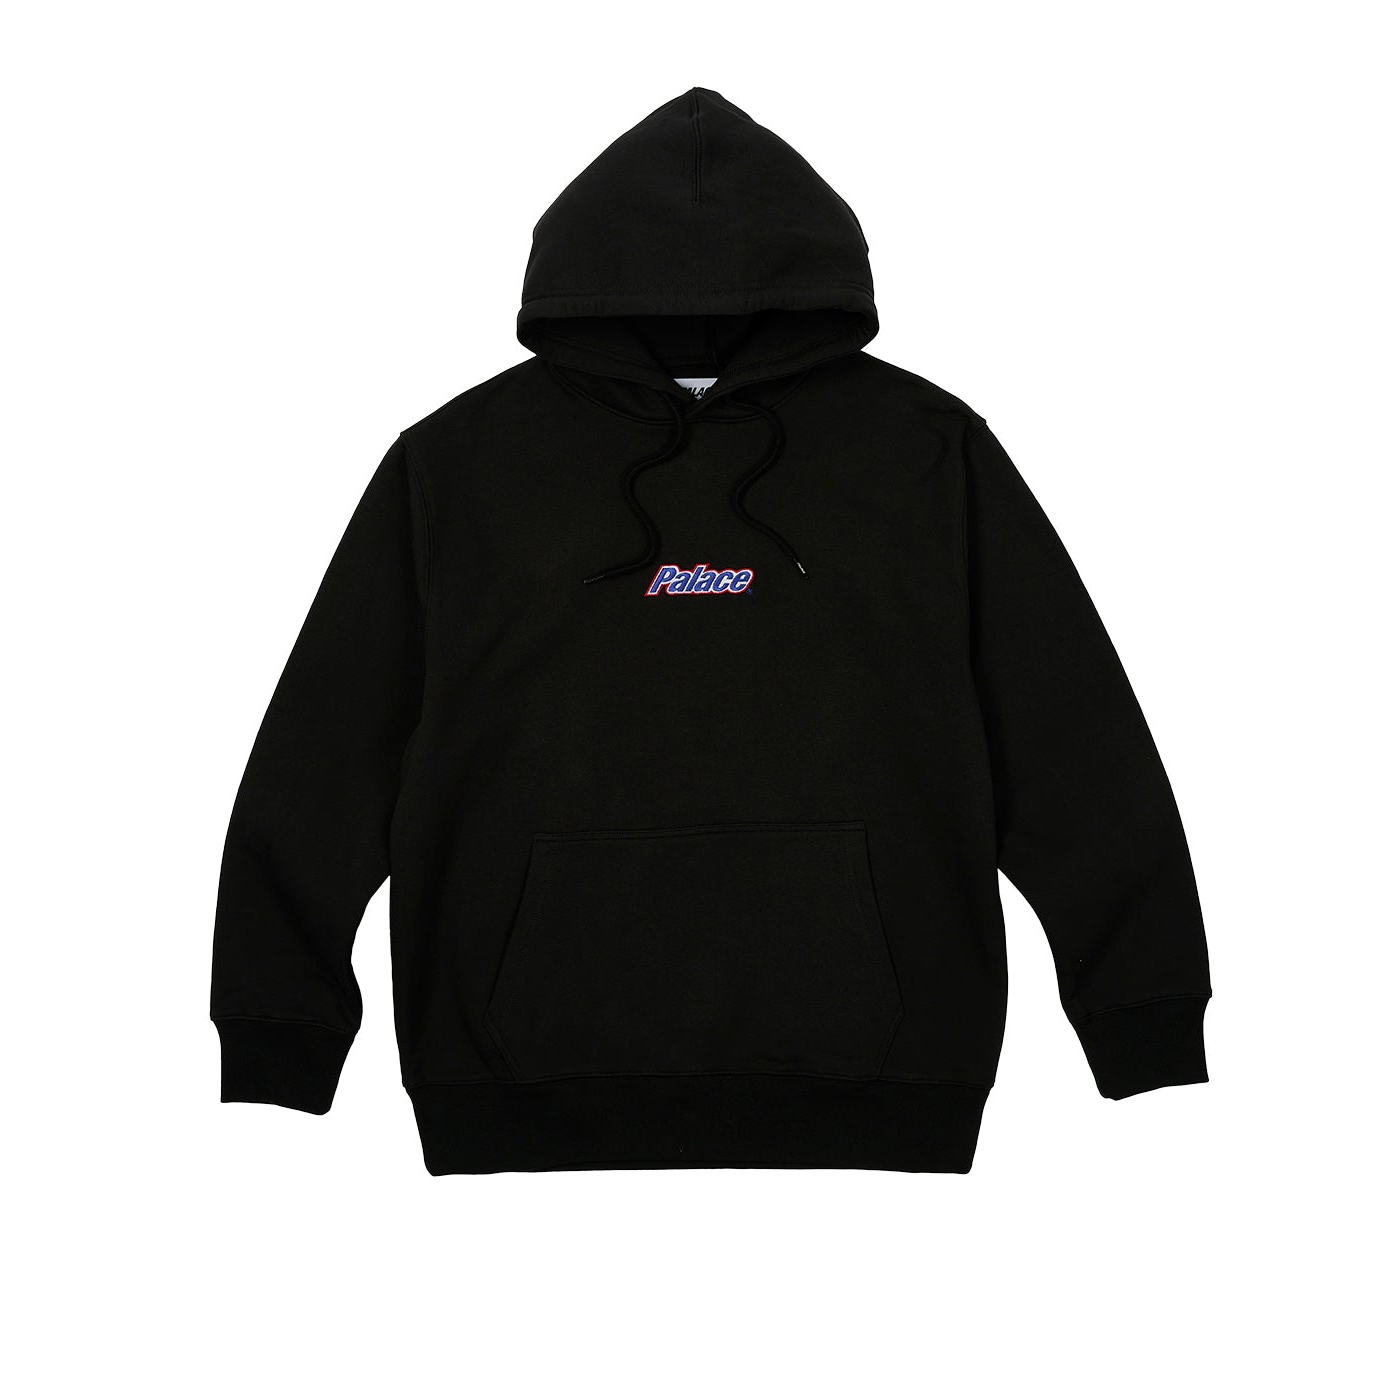 Thumbnail CURRENT HOOD BLACK one color